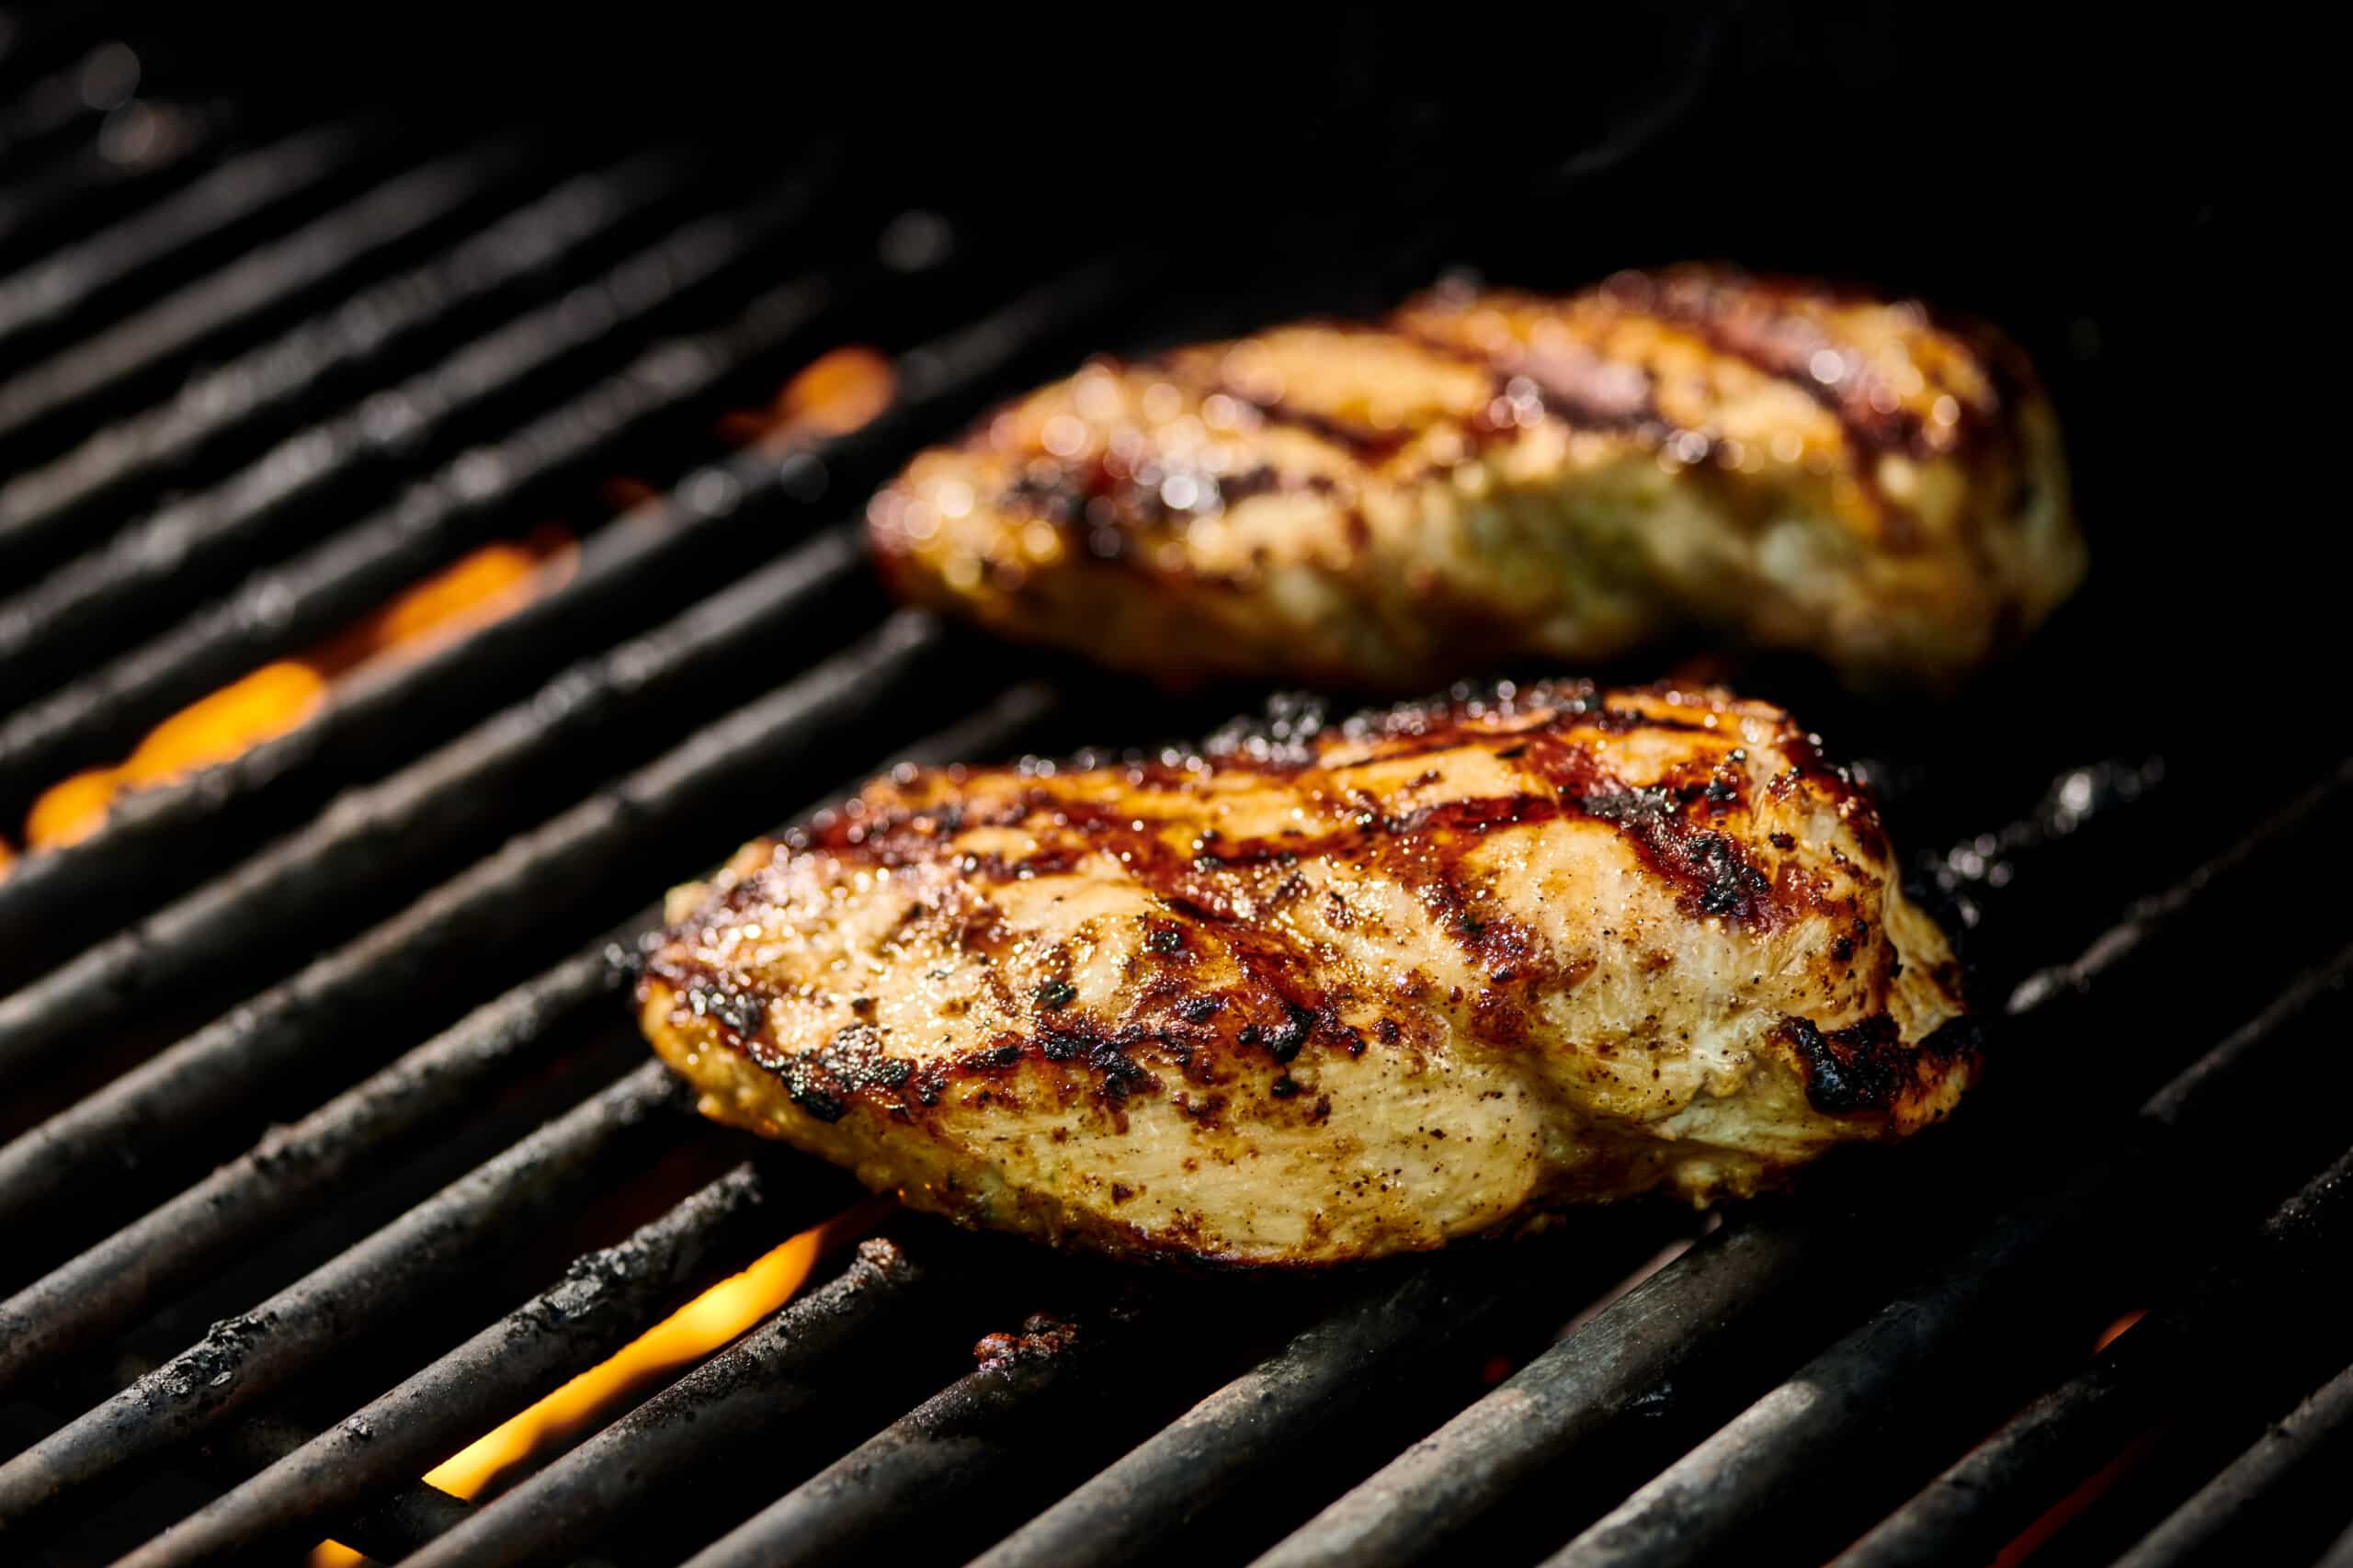 Marinated chicken breasts cooking over flames on hot grill.